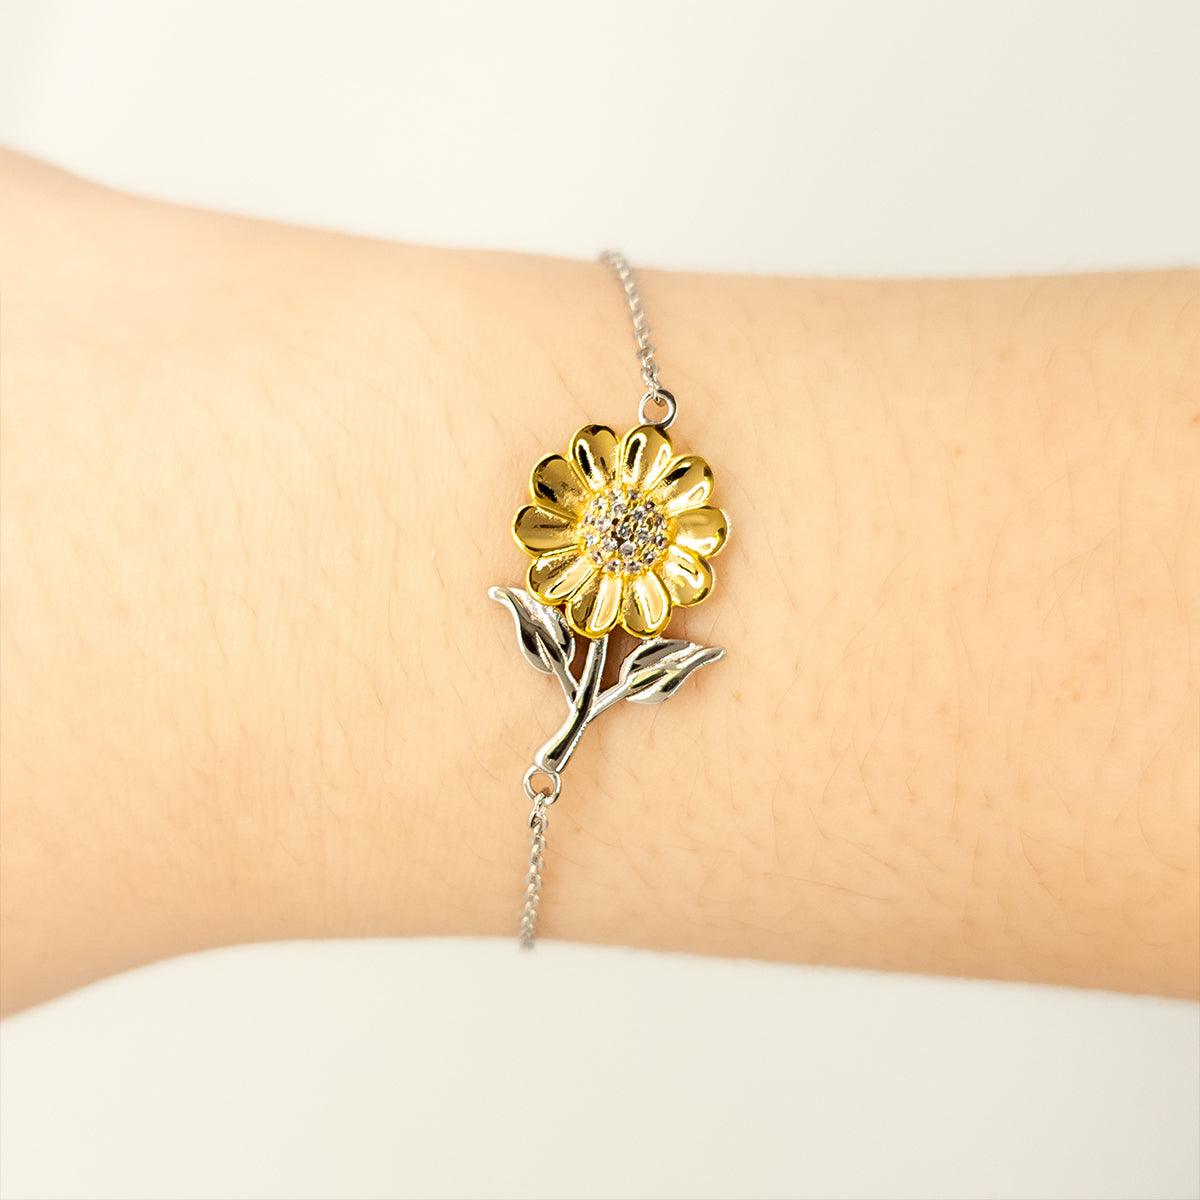 Sarcastic Executive Assistant Sunflower Bracelet Gifts, Christmas Holiday Gifts for Executive Assistant Birthday Message Card, Executive Assistant: Because greatness is woven into the fabric of every day, Coworkers, Friends - Mallard Moon Gift Shop